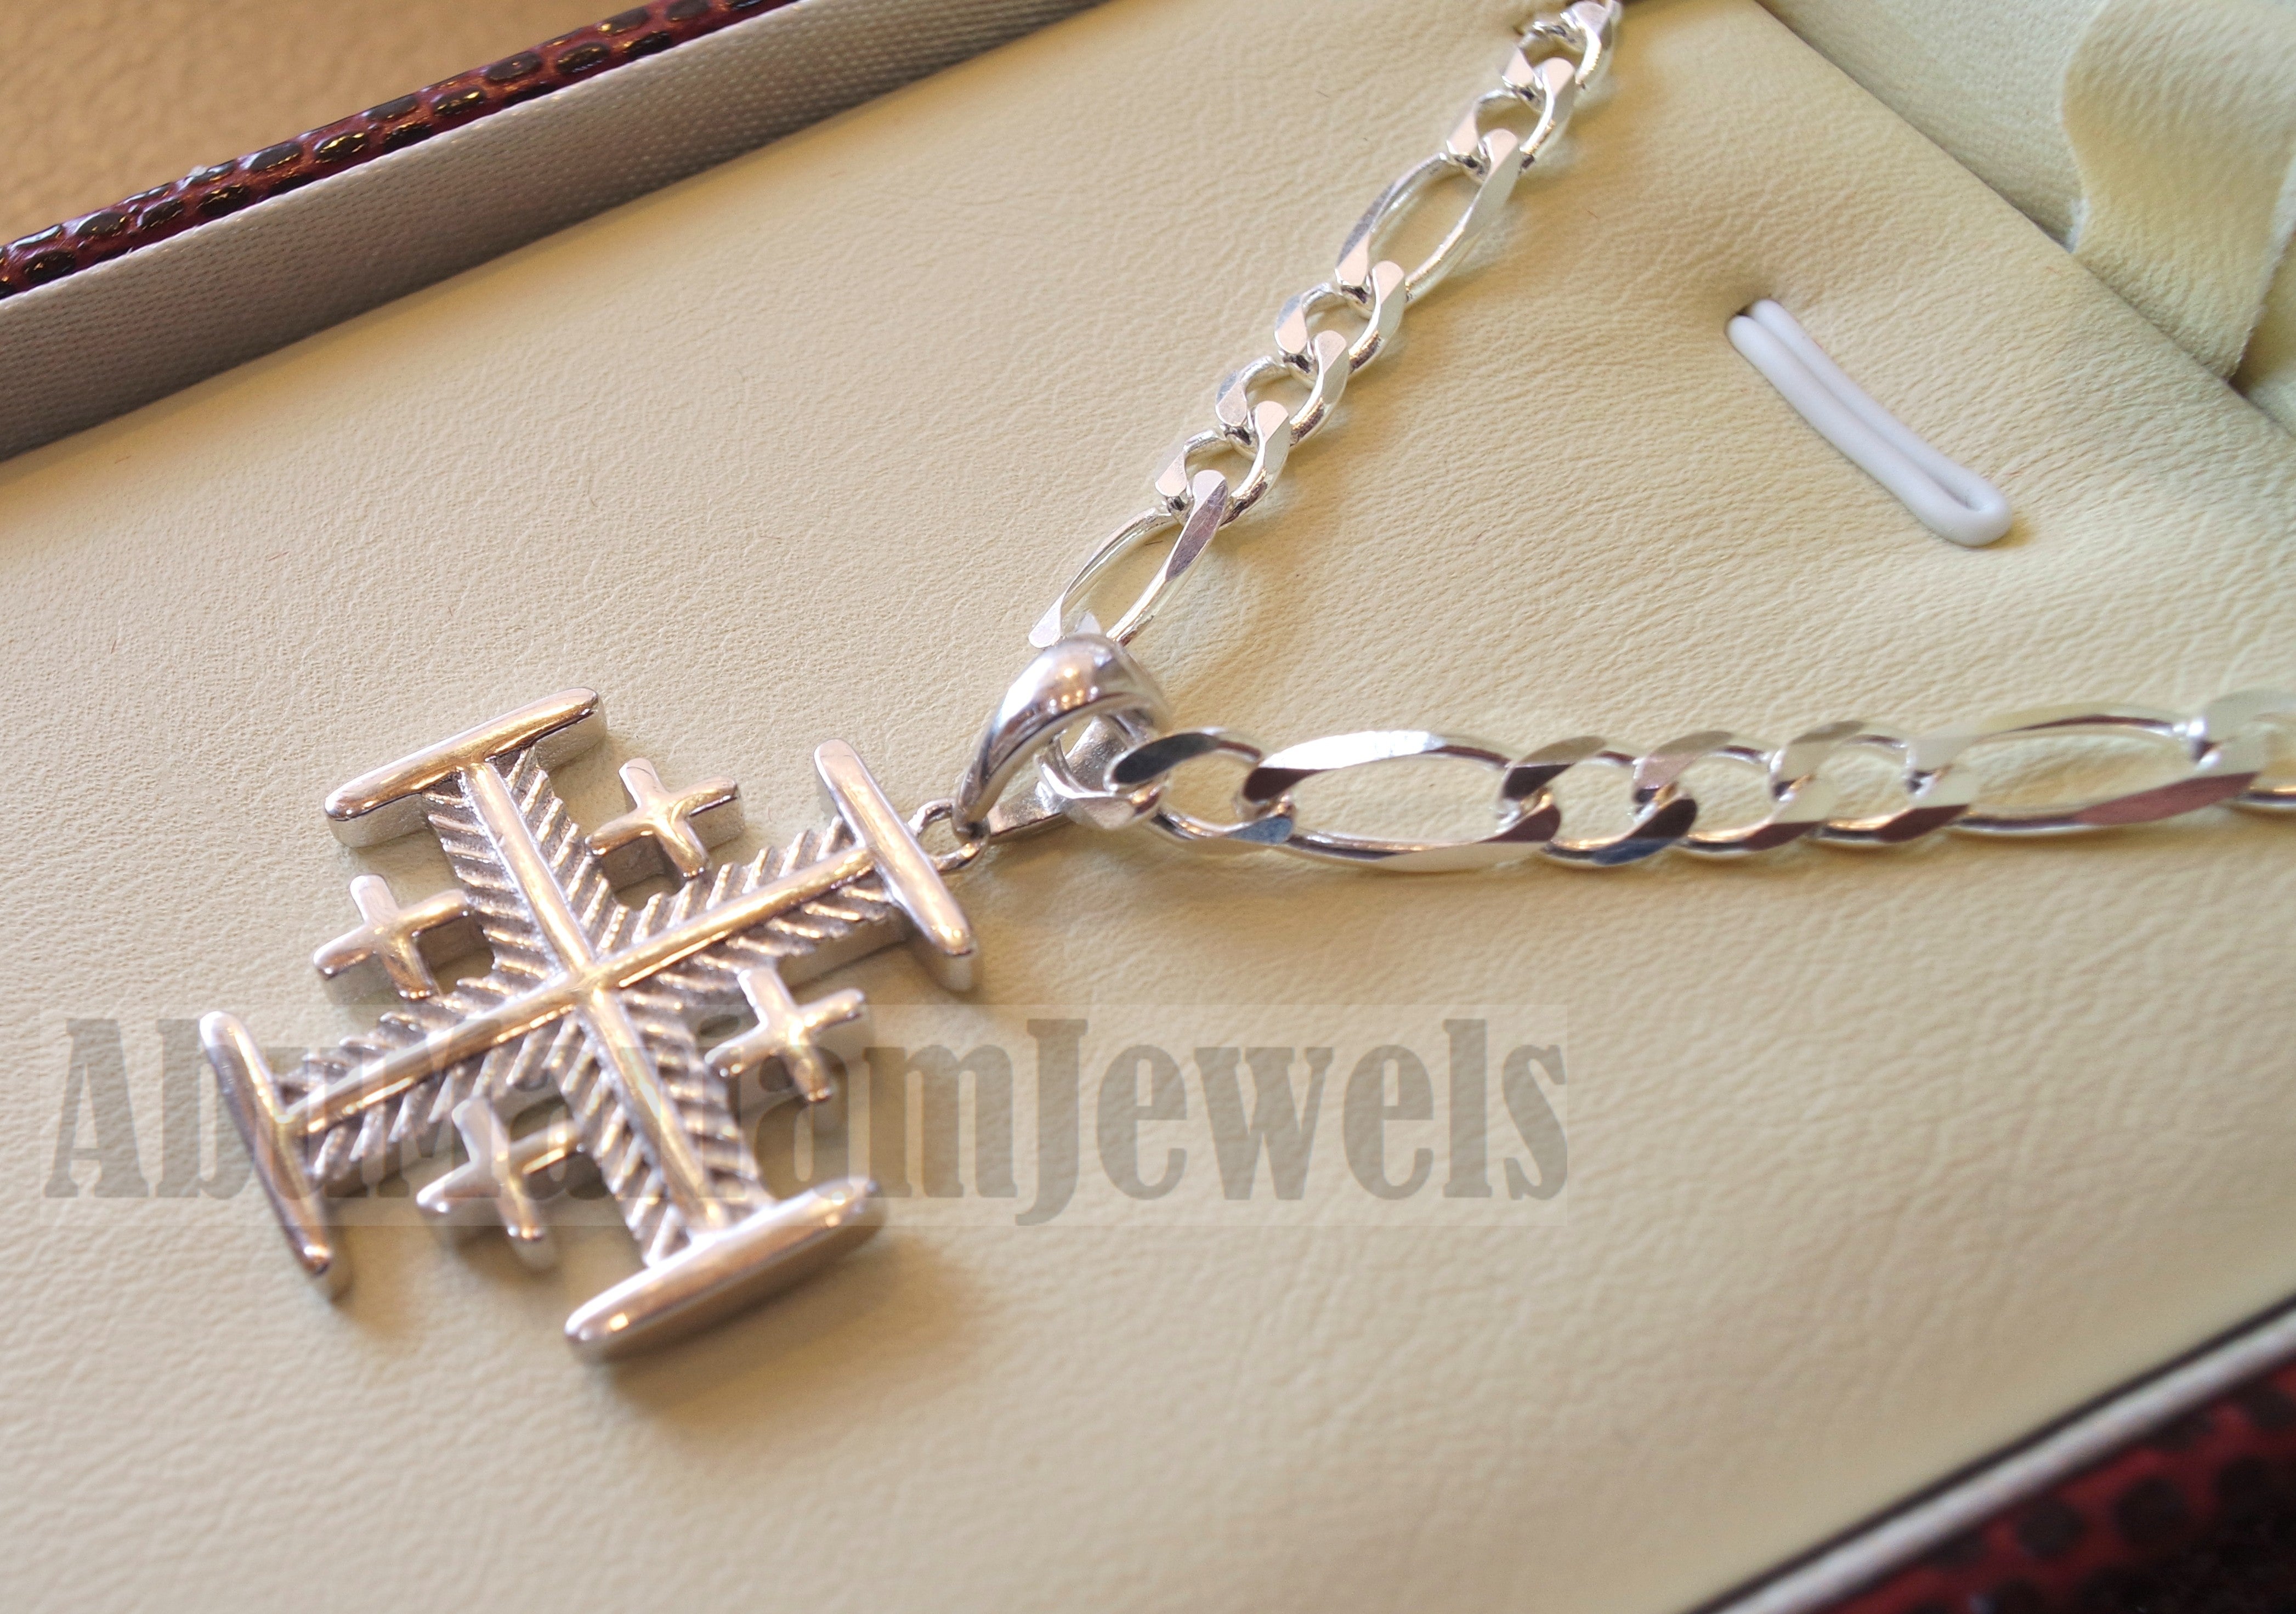 Jerusalem small cross pendant with heavy chain sterling silver 925 middle eastern jewelry christianity vintage handmade heavy fast shipping